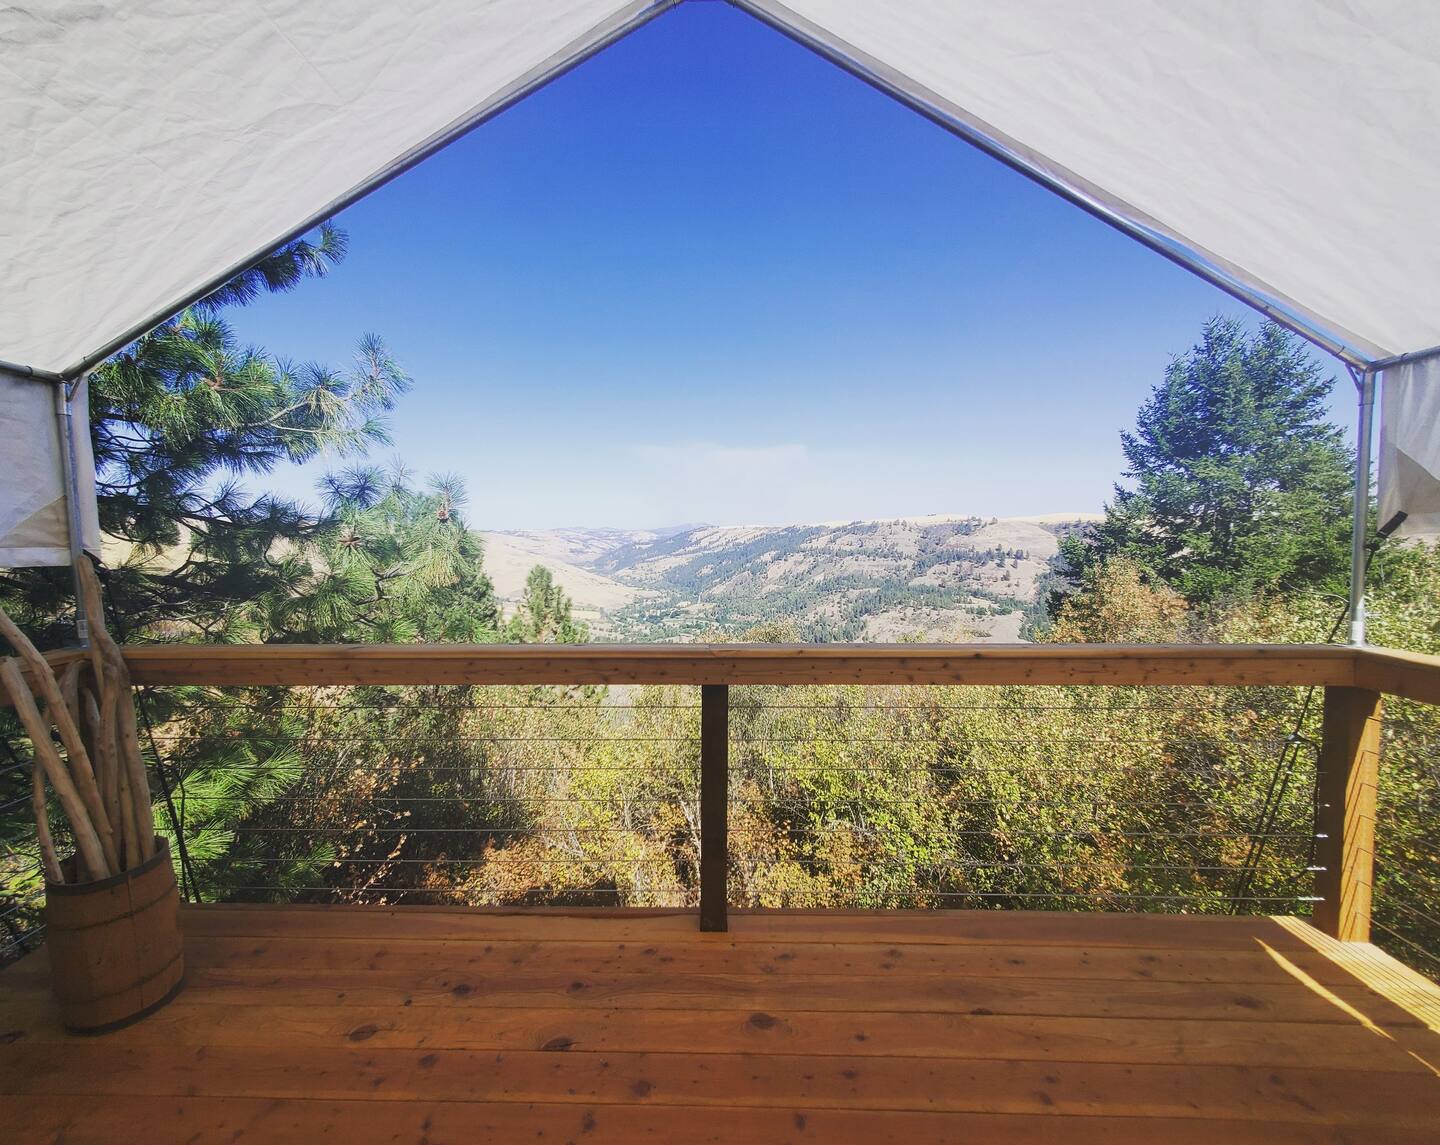 Mountain views from the tent